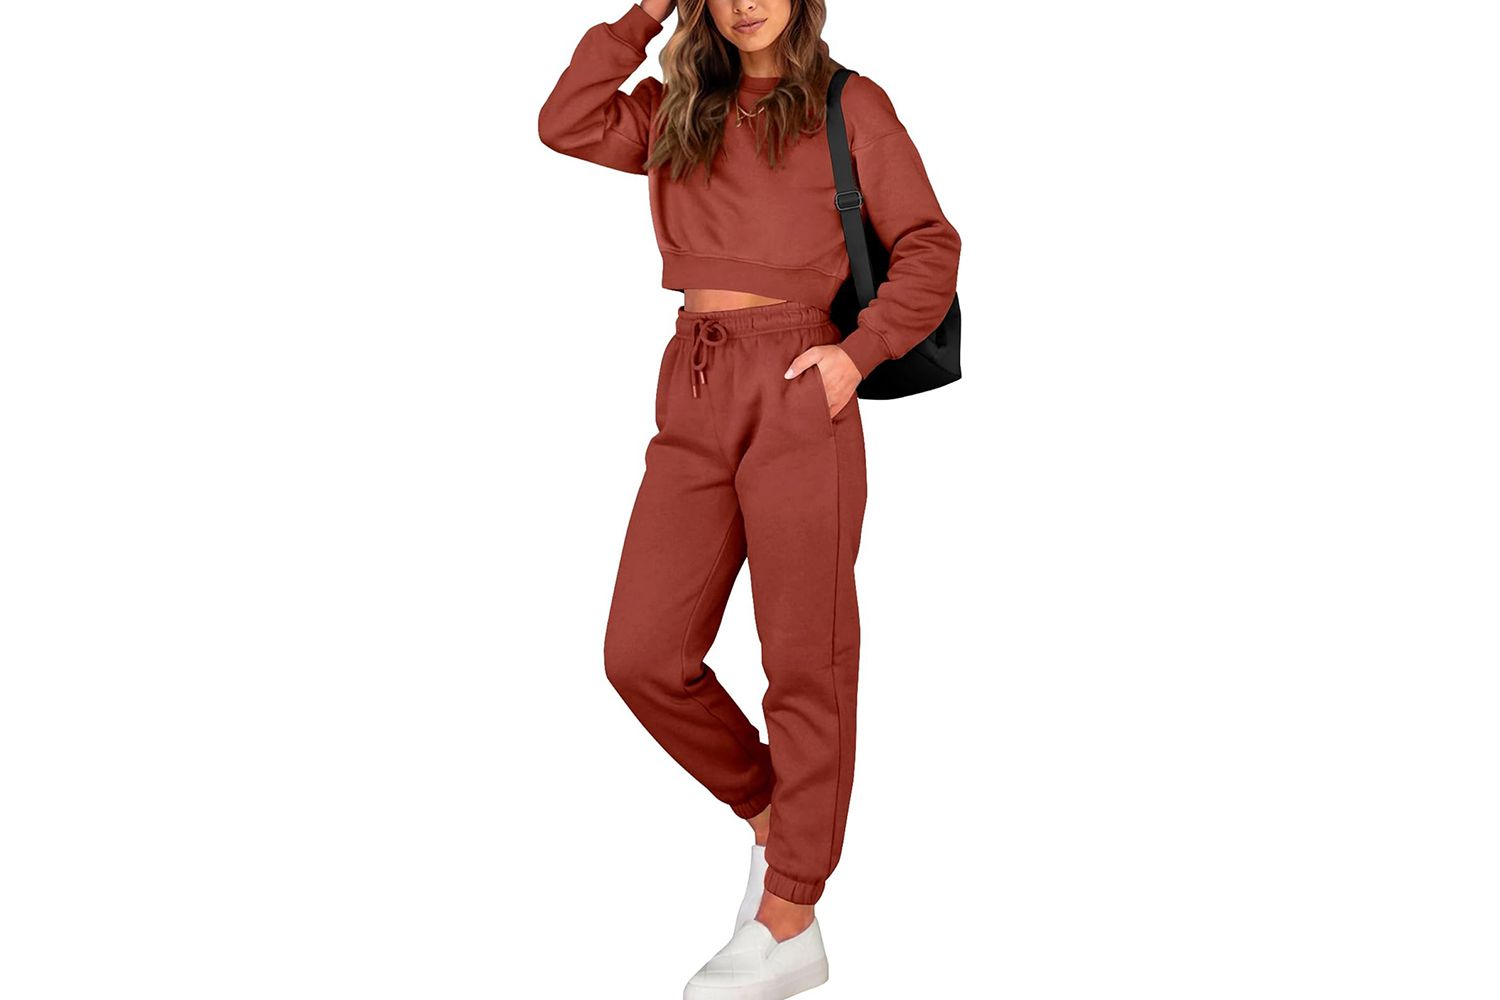 BTFBM Women 2 Piece Outfits Long Sleeve Crop Top Pullover Drawstring Pant Jogger Set Casual Sweatsuits Tracksuit Pockets